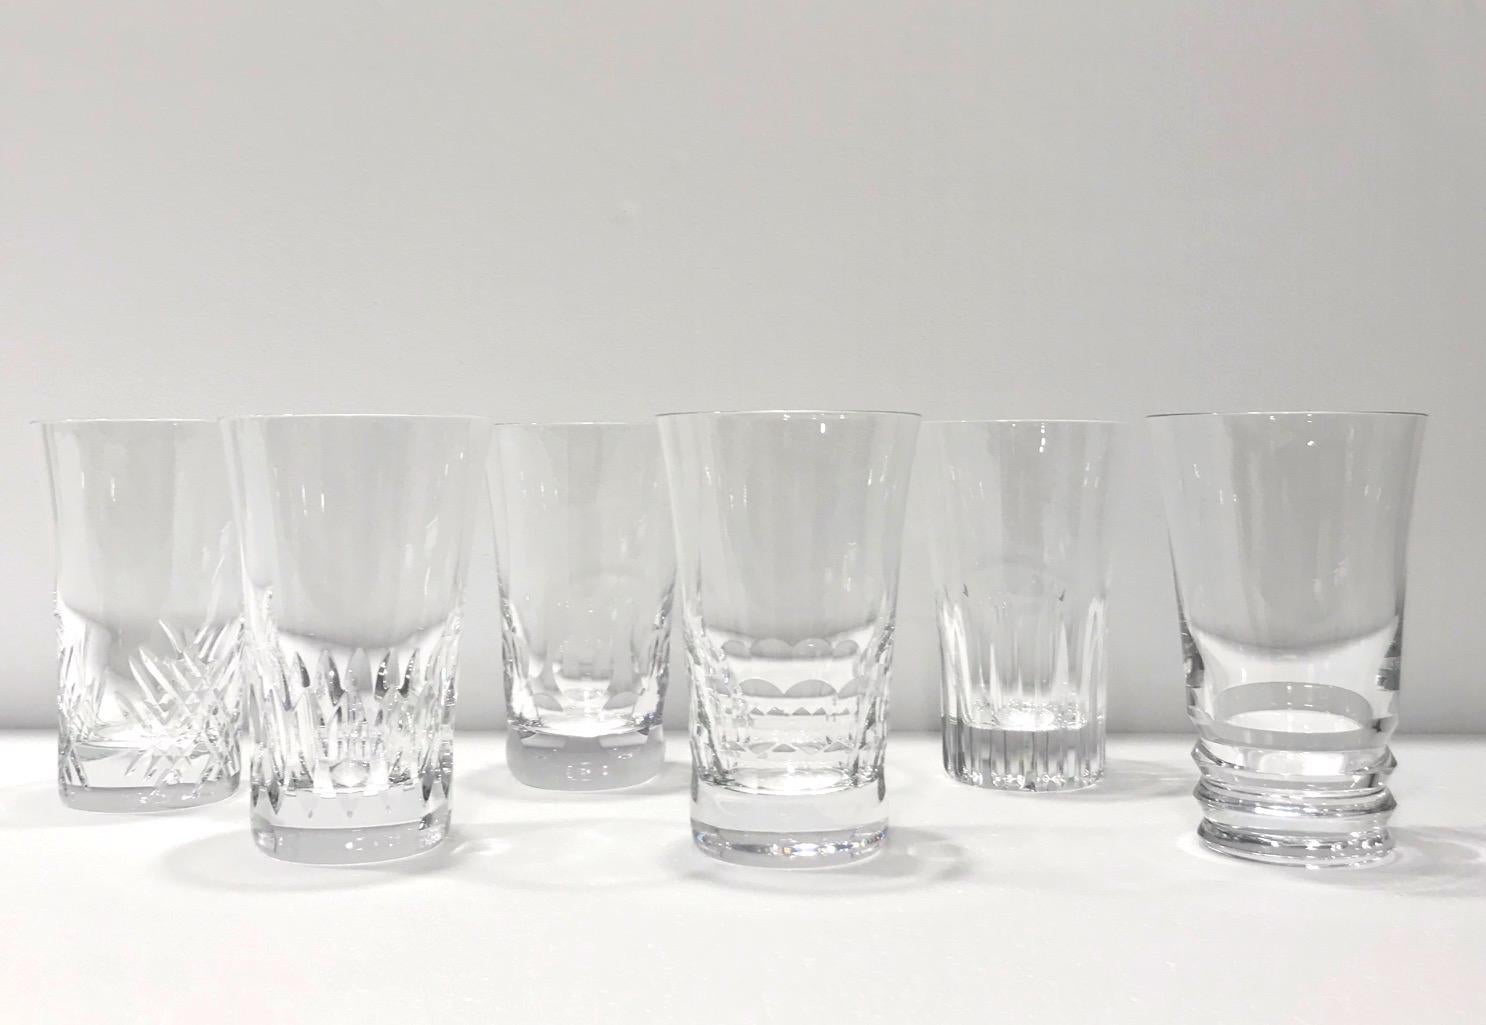 Set of six handcrafted crystal highball glasses each bearing a unique design. Blown crystal glasses feature exquisite handcut designs with geometric patterns, fluted accents, or crosshatched designs. Signed Baccarat on the underside of each glass.